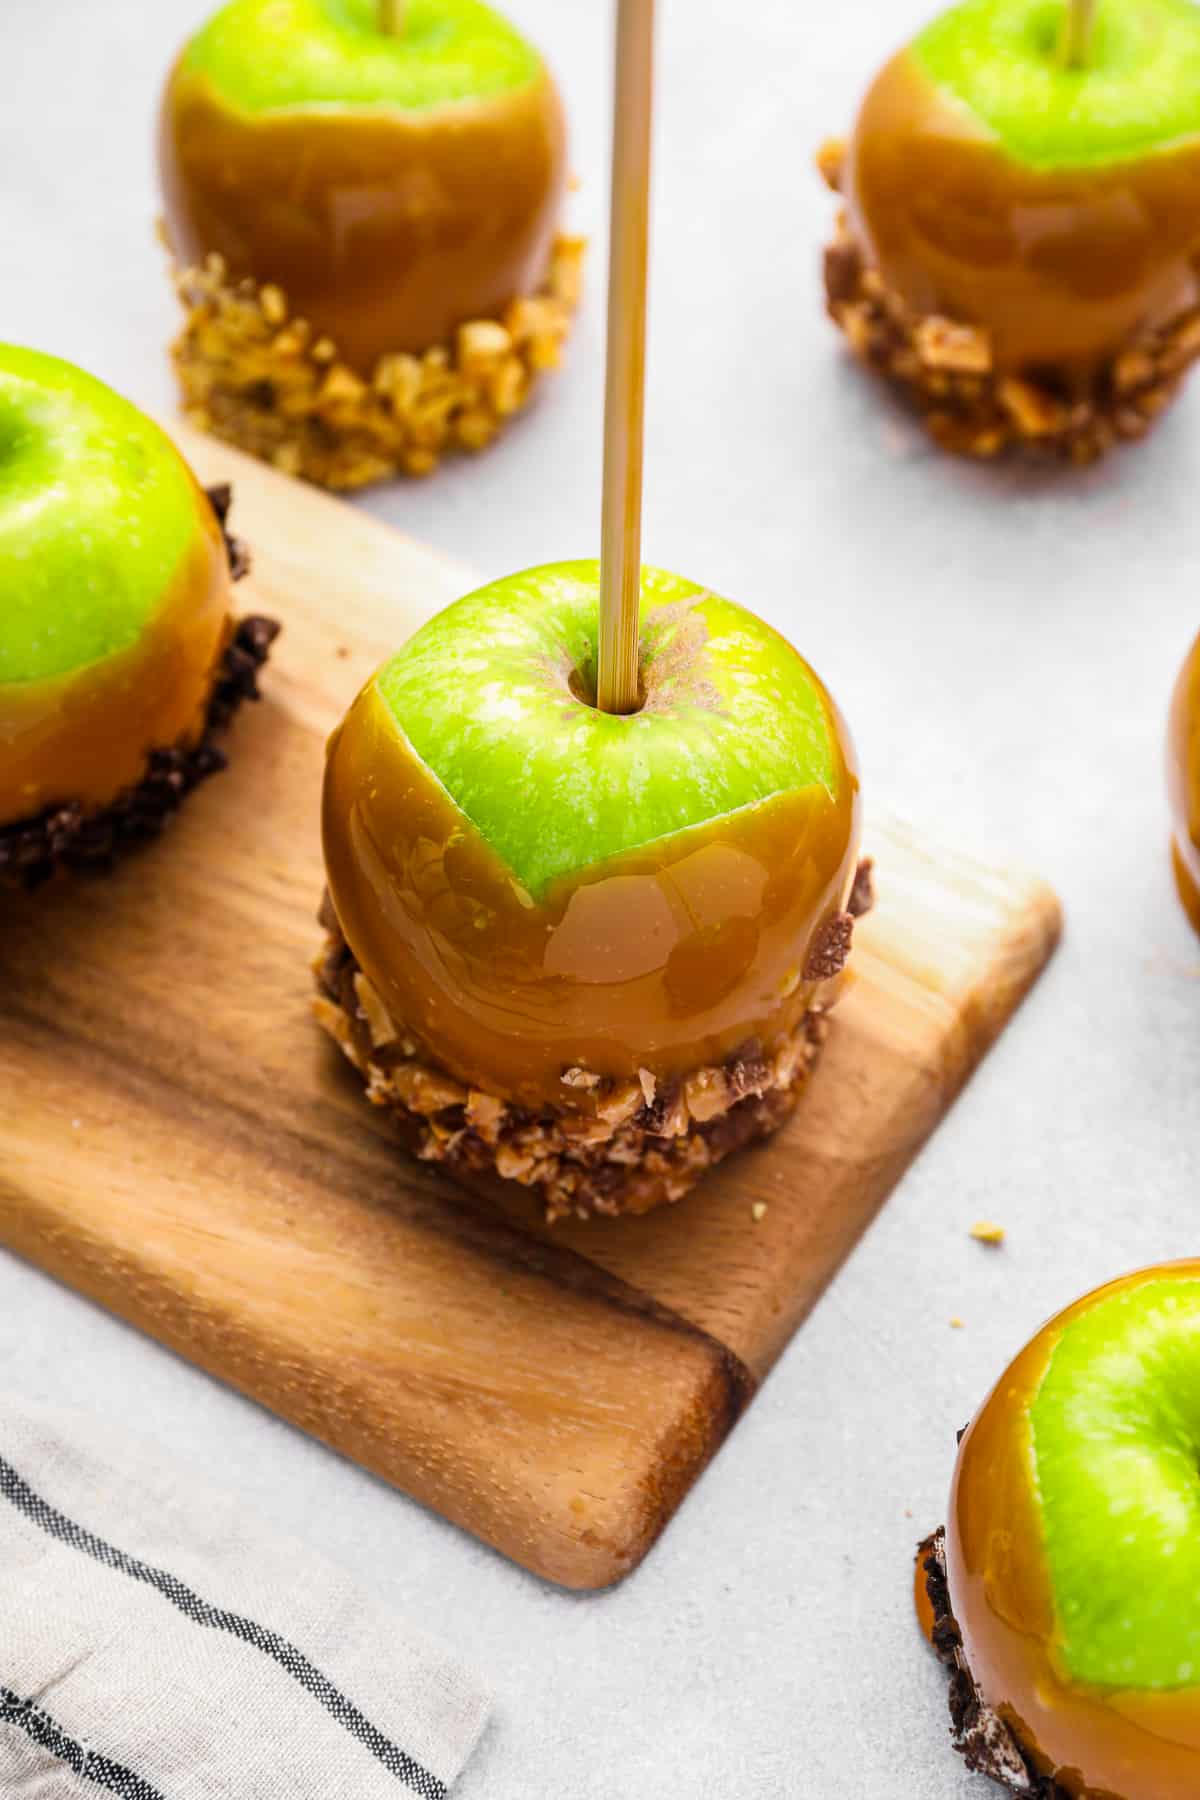 apples coated in caramel and dipped in chopped nuts